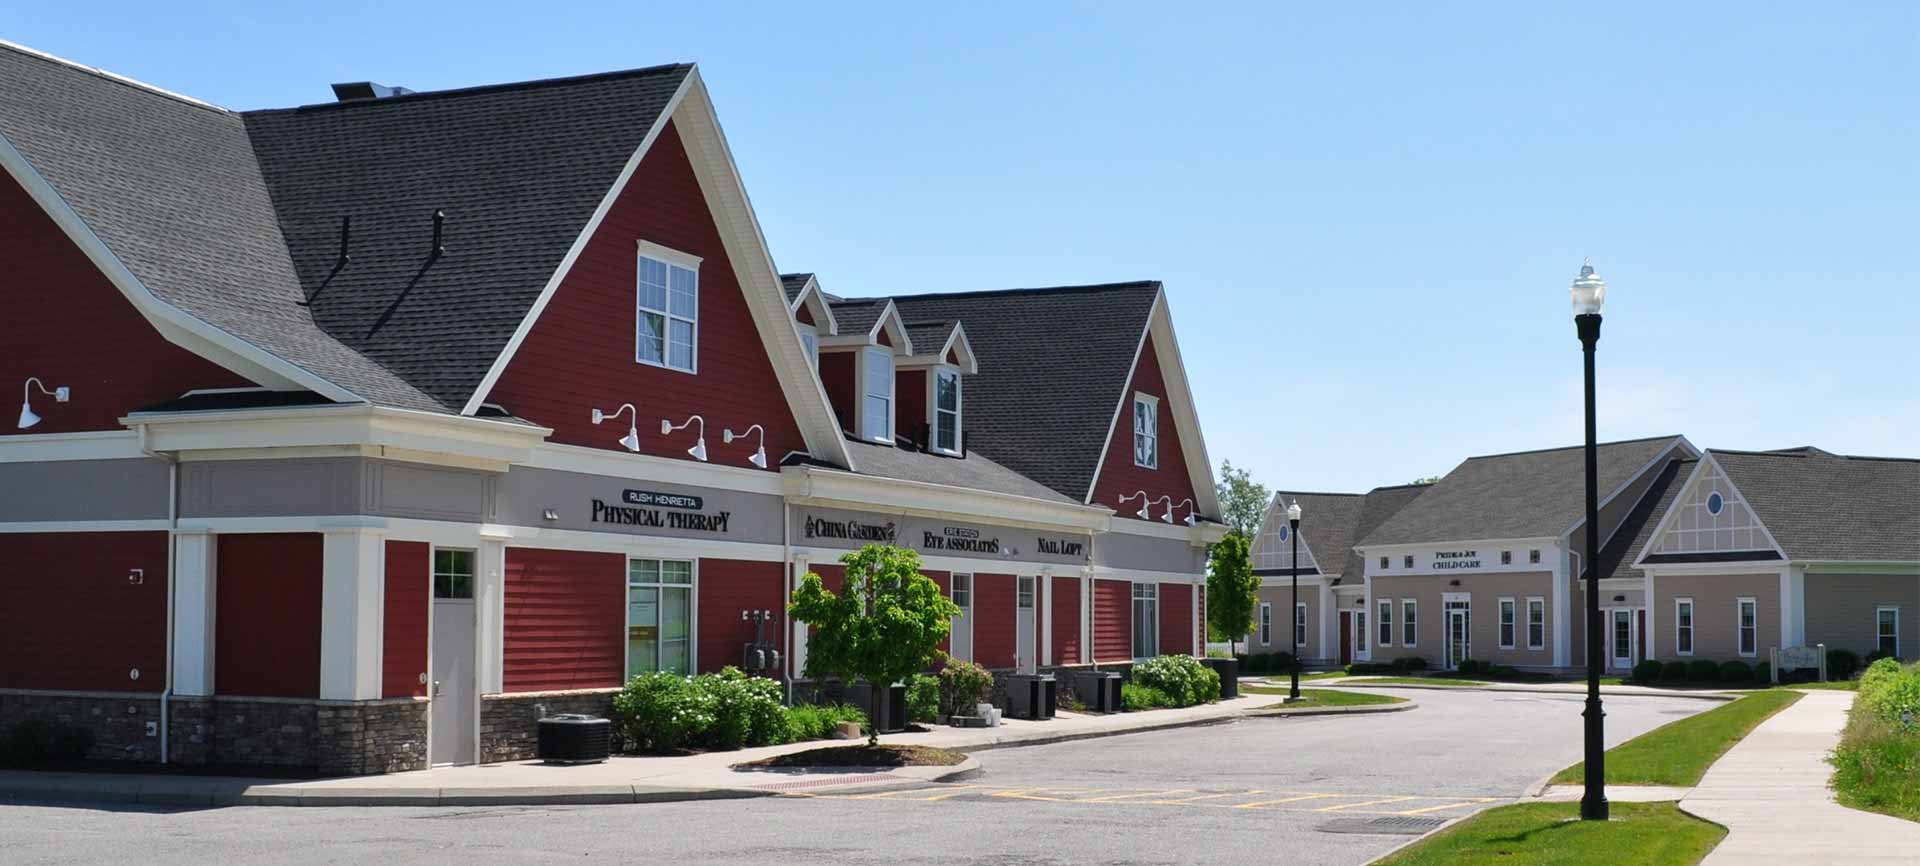 Erie Station West Henrietta, an attractive and timeless mix of retail and office space